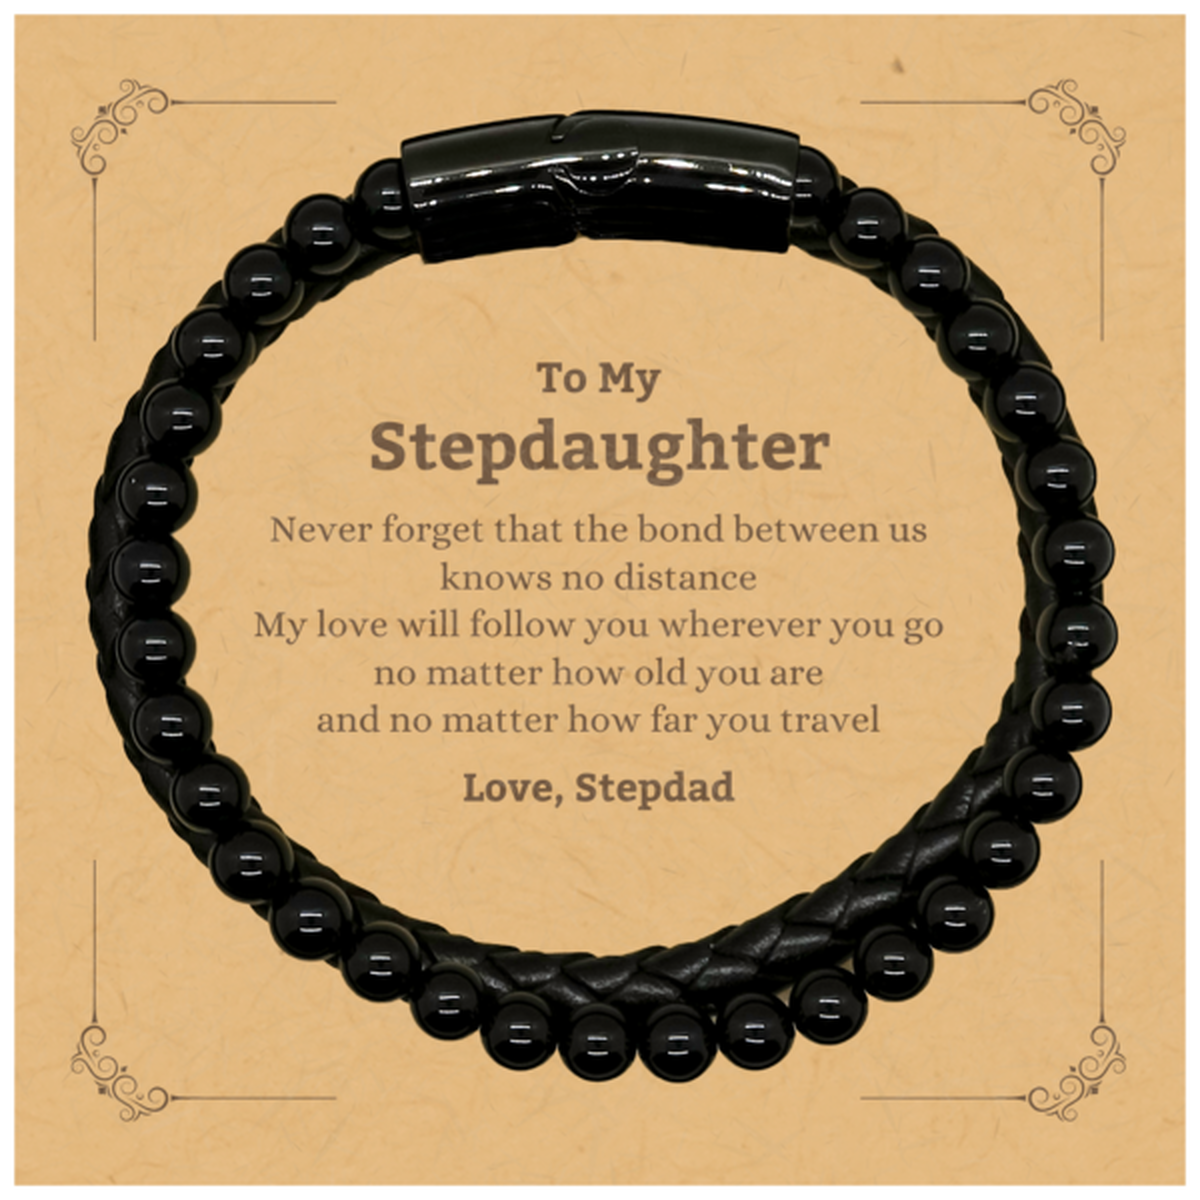 Stepdaughter Birthday Gifts from Stepdad, Adjustable Stone Leather Bracelets for Stepdaughter Christmas Graduation Unique Gifts Stepdaughter Never forget that the bond between us knows no distance. Love, Stepdad